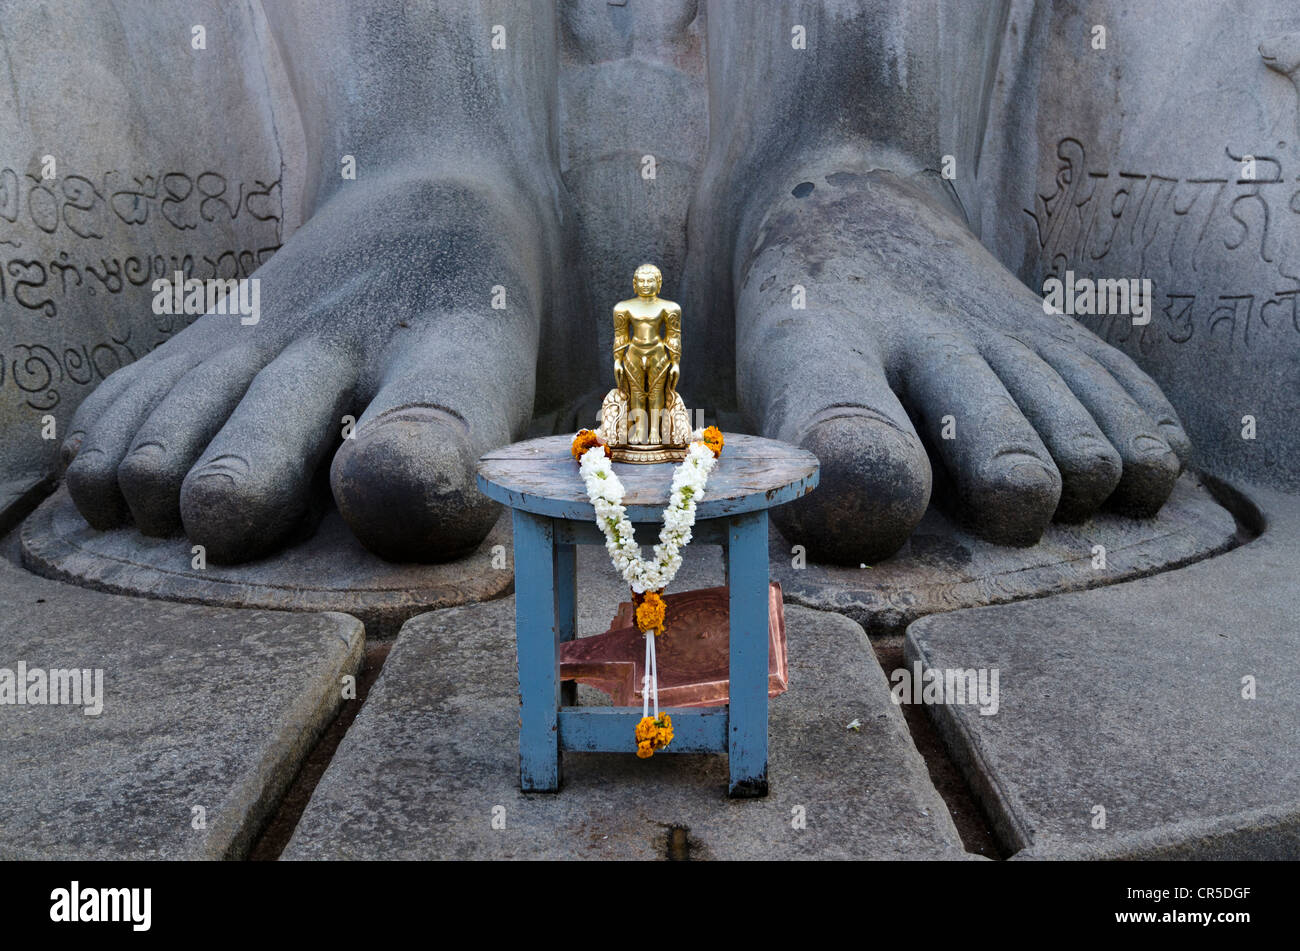 The small statue of Bahubali at the feet of the gigantic statue of Gomateshwara in Sravanabelagola, used for special rituals Stock Photo